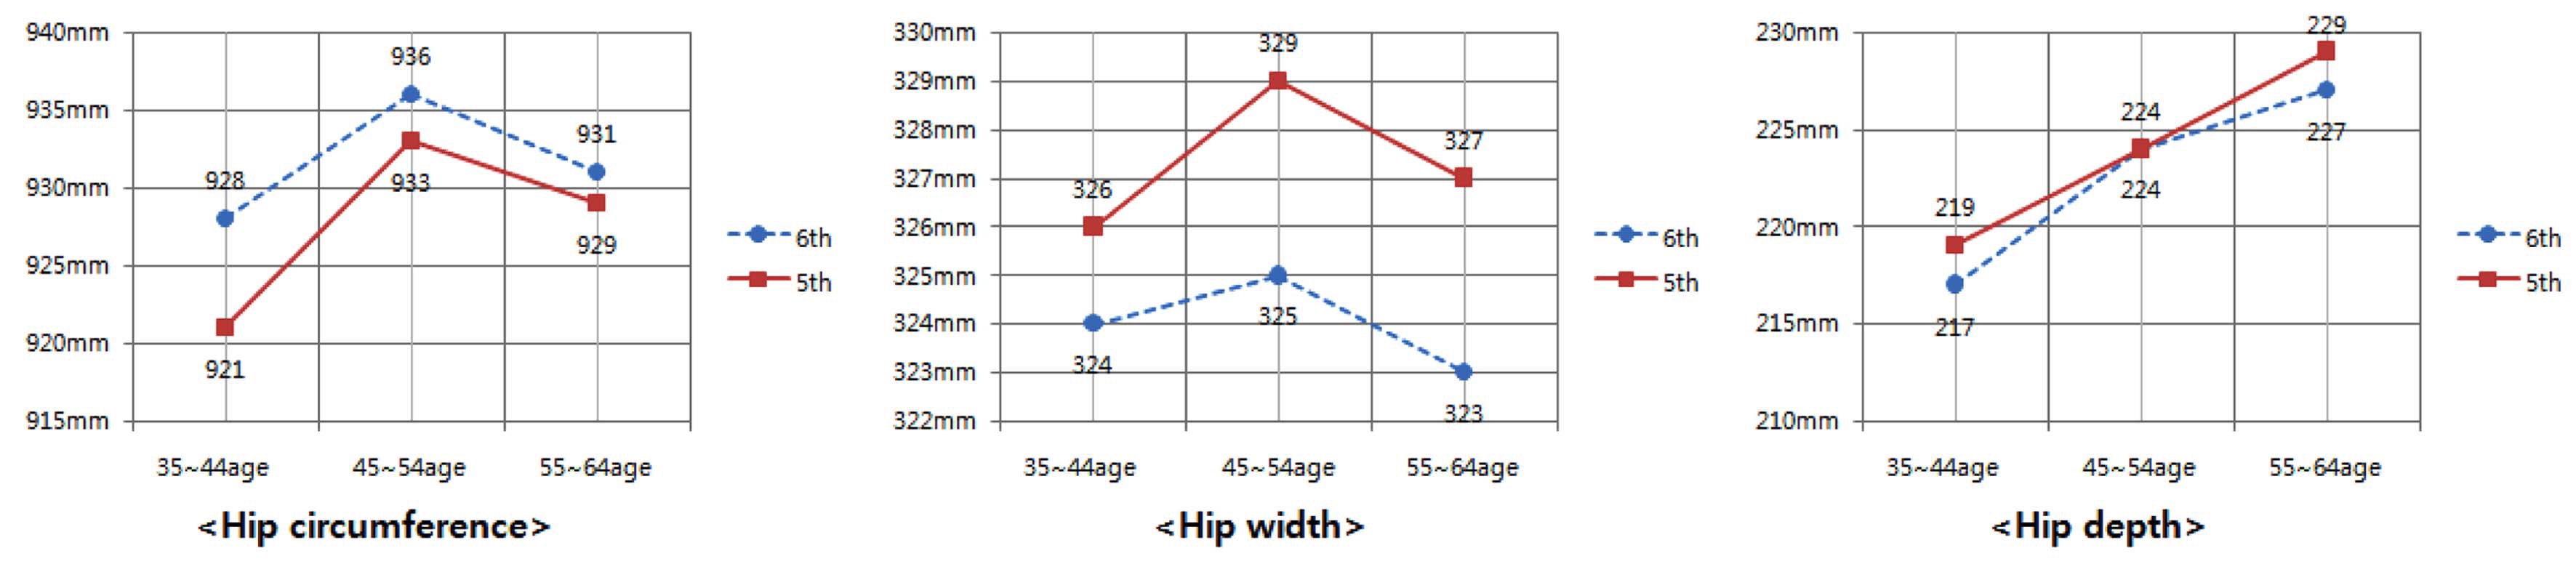 The trend changes according to the age and year of measurement regarding hip-related Items.